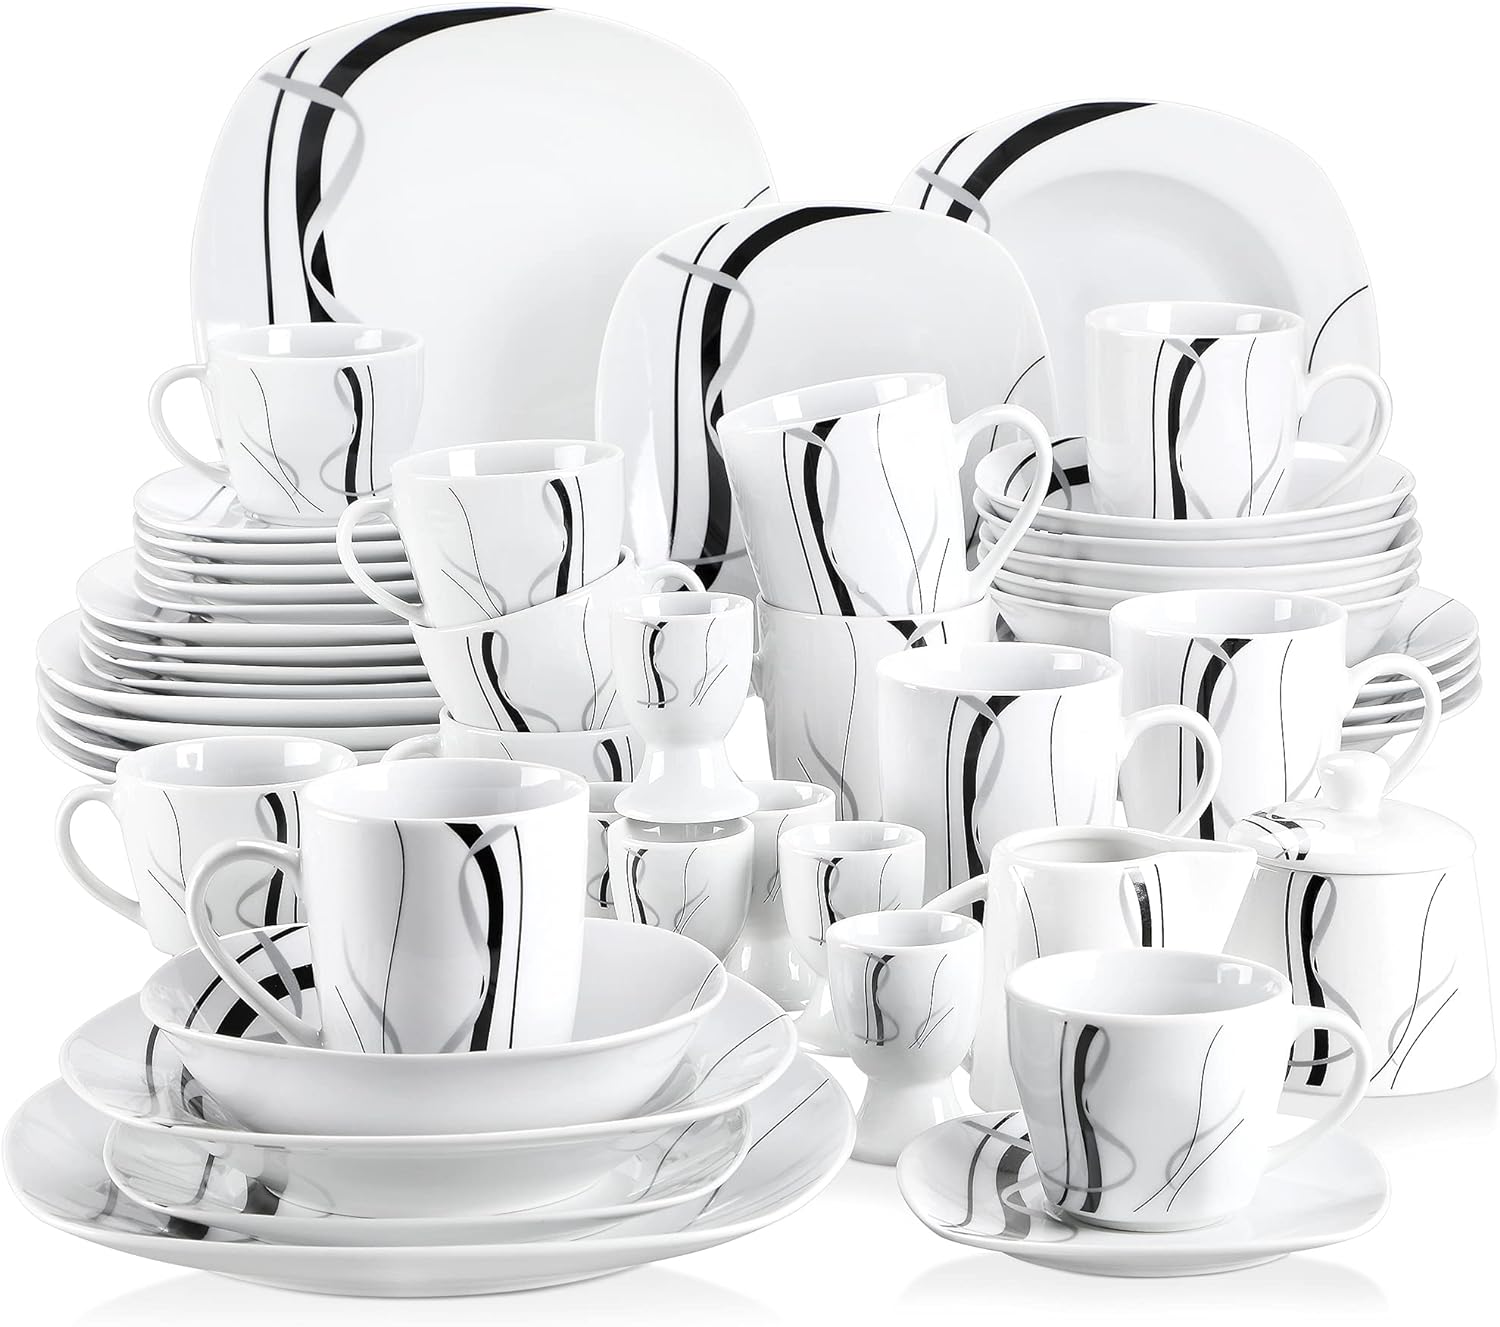 I am happy that I purchased these dishes. My old dishes are too heavy use anymore and they chipped every time I take them out if the dishwasher. These are very light and stylish. they are also chip resistant..Love them. !!!